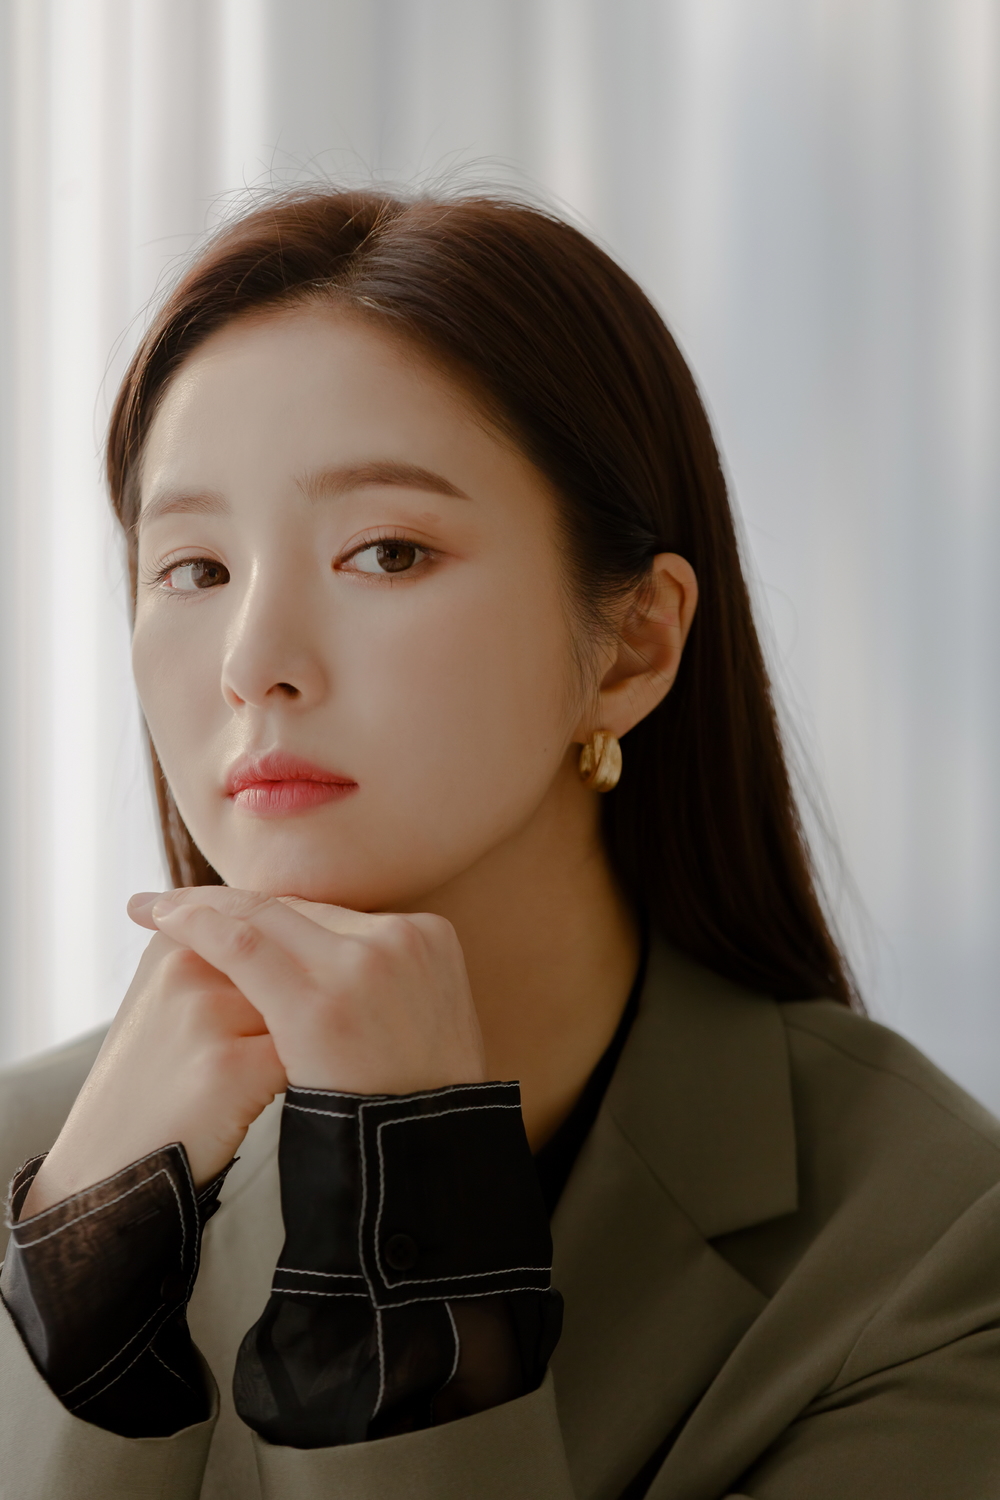 Shin Se-kyung praised Cha Eun-woo for co-working through Newcomer Rookie Historian Goo Hae-ryung.Actor Shin Se-kyung played the role of Rookie Historian Goo Hae-ryung, the first Ada Lovelace () Rookie Historian Goo Hae-ryung in the MBC drama Rookie Historian Goo Hae-ryung (played by Kim Ho-soo/directed Kang Il-soo, Han Hyun-hee).He led the entire drama by completing Rookie Historian Goe-ryung, who is growing up as a true officer, as well as his romance with Lee Lim (Cha Eun-woo).Shin Se-kyung, who met at a cafe in Nonhyeon-dong, Gangnam-gu, Seoul, ahead of the end of the new officer Rookie Historian Goo Hae-ryung, said, After the filming,It was the first time I finished a drama with a much longer co-work than expected.It is a pity and cool to leave the work that I shot for a long time, he said.I am curious and excited about how to accept the ending. Shin Se-kyung, who had poured tears after finishing the last filming, said, On the way to the filming site that morning, my manager told my brother, When I was young, I was tearful, but now I do not feel like that.But I poured tears in less than a second. He confessed, I do not know why, but I was tearful when the bishop told me that he was working hard with a bouquet of flowers. When I think of the female image of Joseon in the 19th century, I think of the first thing that emphasizes family such as marriage, inner life, and parenting.But Rookie Historian Goo Hae-ryung lives the exact opposite of women at the time.Despite the age of being over the horn, the interest of Rookie Historian Goo Hae-ryung is only a new culture.Especially, even in the unfairness, the courage to speak the right values ​​and the determination to take the Ada Lovelace star examination instead of the gentle marriage can confirm the enterprising aspect of Rookie Historian Goo Hae-ryung.Shin Se-kyung said, Although I have done a lot of historical dramas, I have thought that I should have a different idea from Li Dians framework.Shin Se-kyung said, In the middle and late half of the year, I was heavy in dealing with serious and heavy events, but Na Hae-ryung had an unusual aspect unlike Li Dian historical drama characters.I wanted to express those things well, and I tried not to have a hard stereotype about the history and past life I knew. The opposite role Cha Eun-woo and co-work would have been important, too. Shin Se-kyung said, I think Cha Eun-woo played a very big role in producing different colors from other historical dramas.No matter how light ambassadors and light situations are drawn, I was worried that the basic tone would be heavy because it is a historical drama.However, the way Cha Eun-woo expresses itself is unique and different.It seems to have helped me to express freshness because it is different from I should do this with my drama. Shin Se-kyung said, What kind of actor was Cha Eun-woo seen next to him? I have a strange thing, he said. I have a lot of schedules and I was really busy.Even if there was a break in the middle of the shooting, the friend went to another schedule, but the energy itself is very bright.It is positive and there are many laughs. No matter how rationally people control, it becomes difficult when physical strength or condition is bottomed out.It is really hard to act in the heat in that situation, but it was bright enough that I thought that my natural nature was that. I was grateful as a co-worker. Shin Se-kyung also had a hard time with a busy schedule in his early 20s.Its much better now than then, he said. At least we have enough time to know what the schedule is today and check our attitudes.Of course, I dont think that was wrong then.I felt like I was being dragged into the schedule when I did not know what to do tomorrow, he said. So I saw the attitude of the busy friends like Cha Eun-woo, who just said, I thought that bright and positive energy is a temperament that can only be born.kim myeong-mi